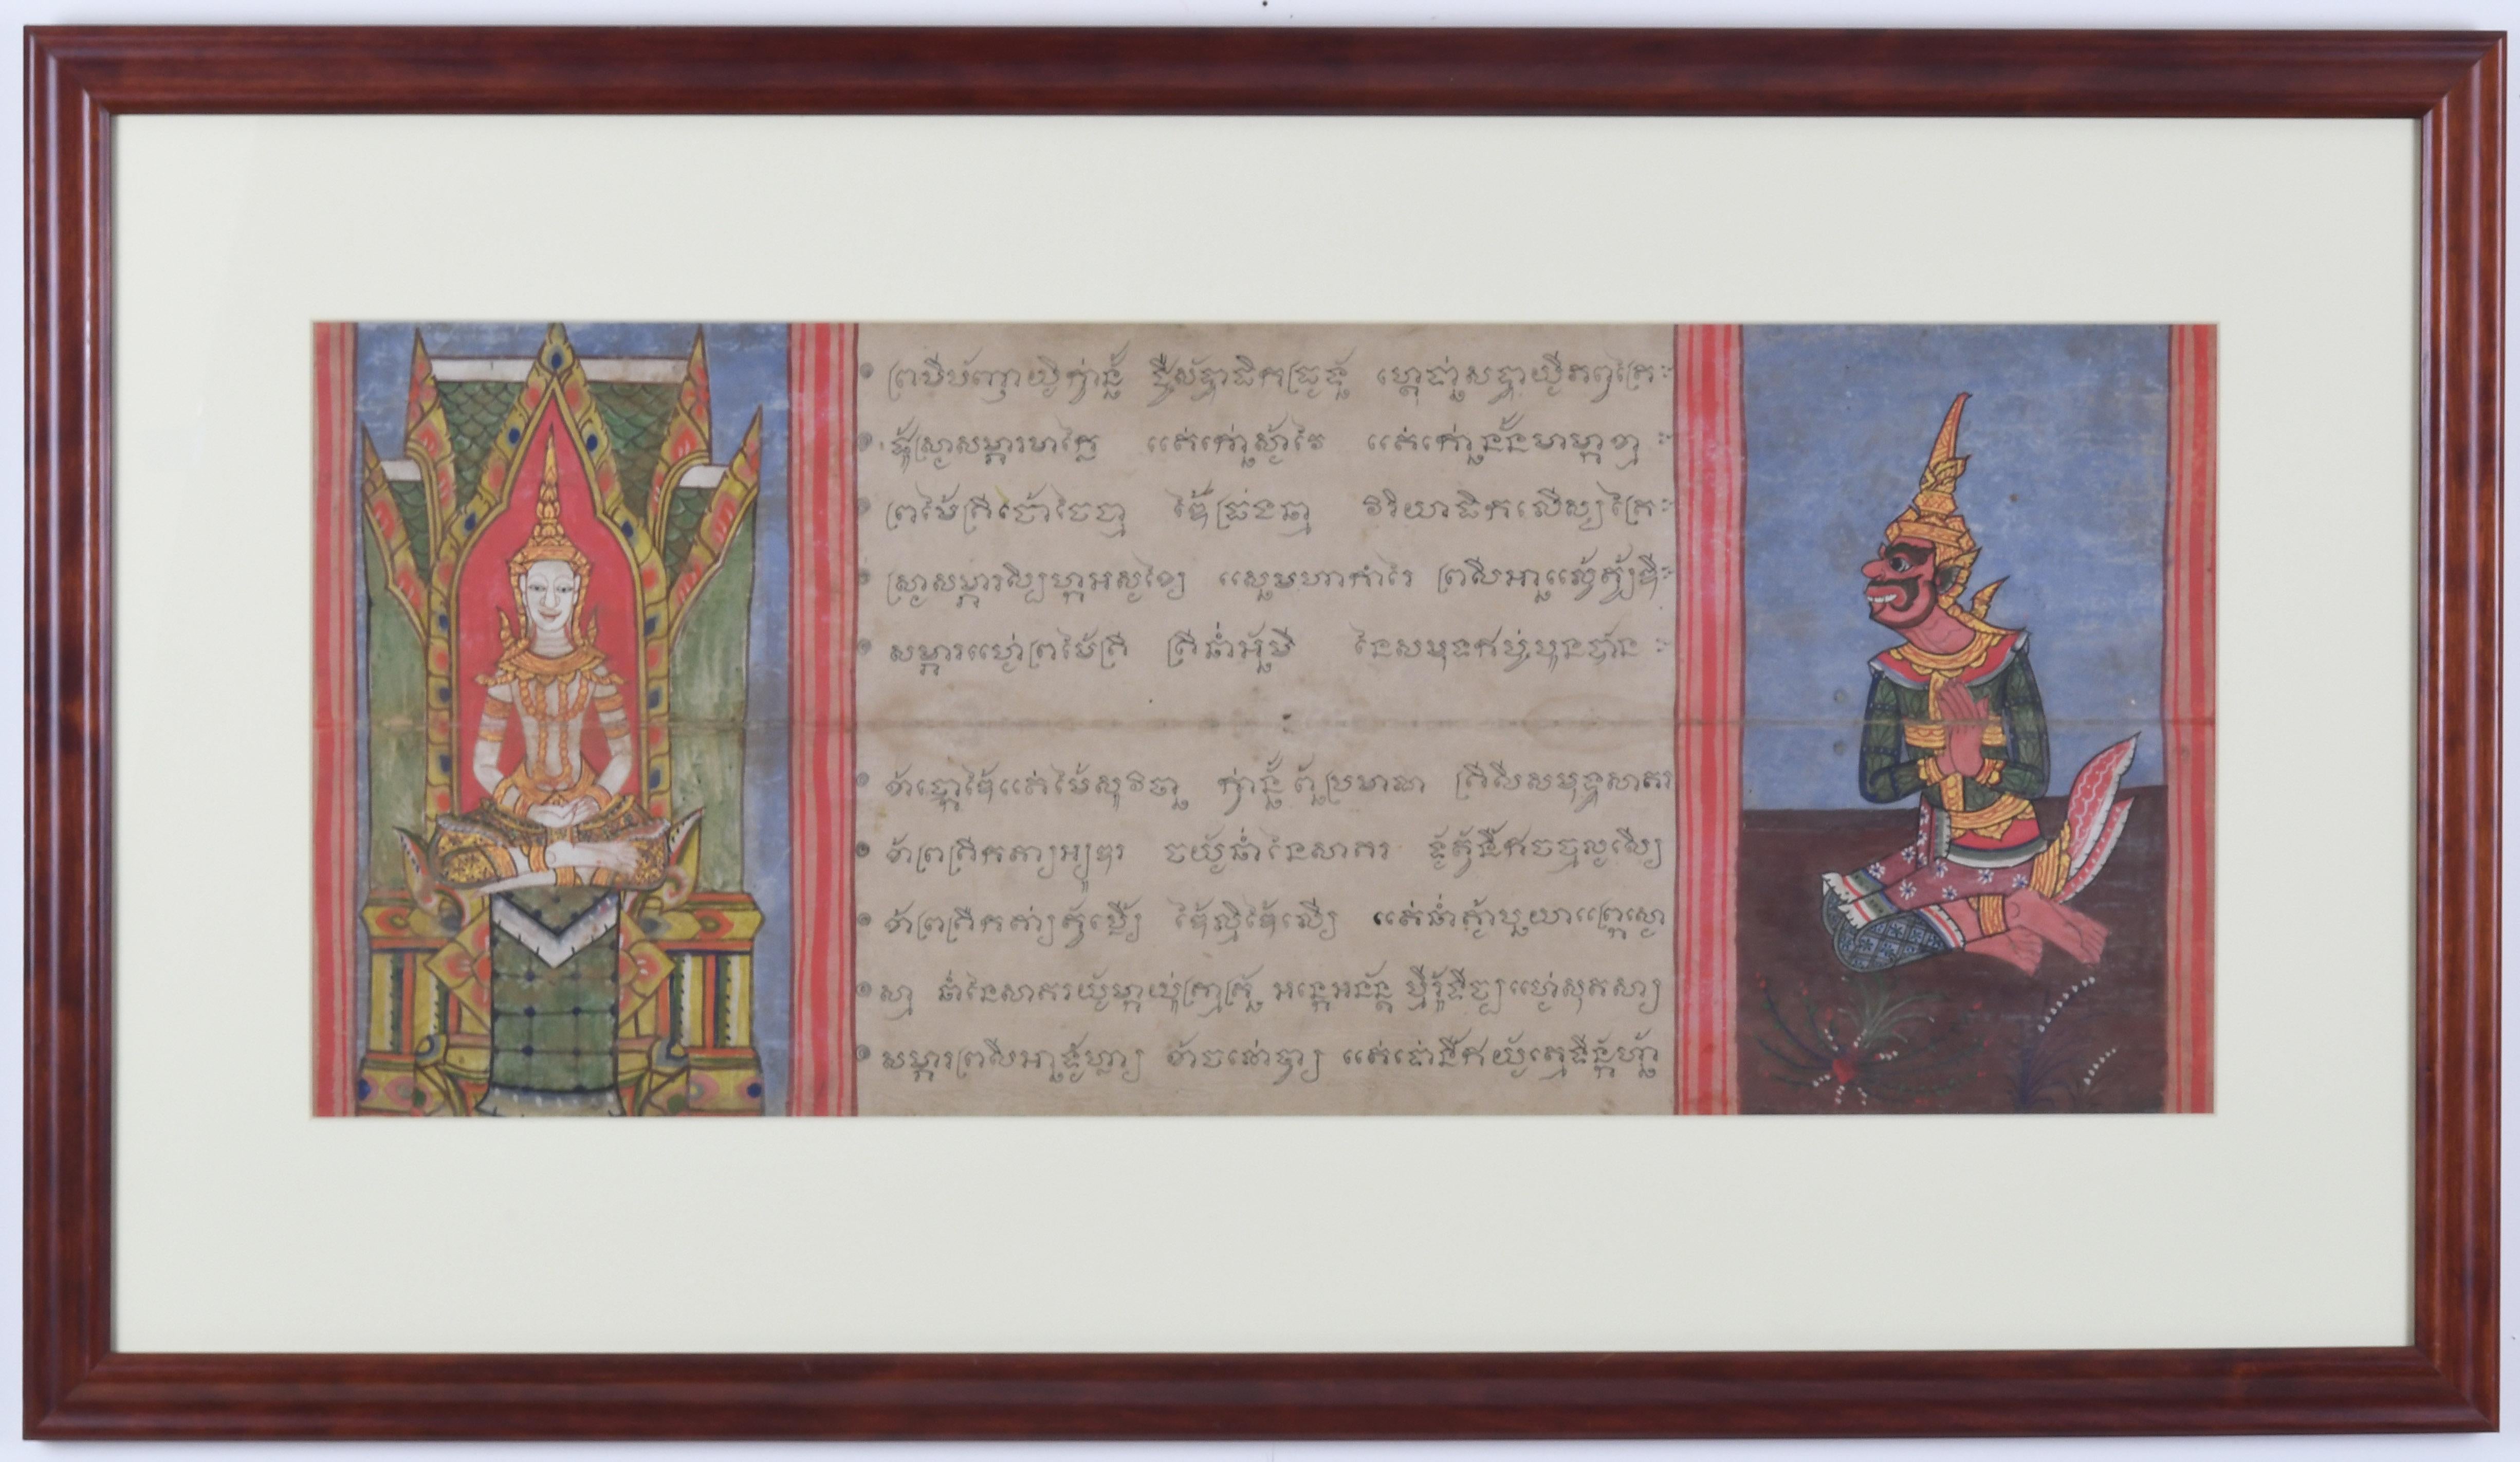 Unknown Artist, Thailand, 19th century
Miniatures with Text from the 